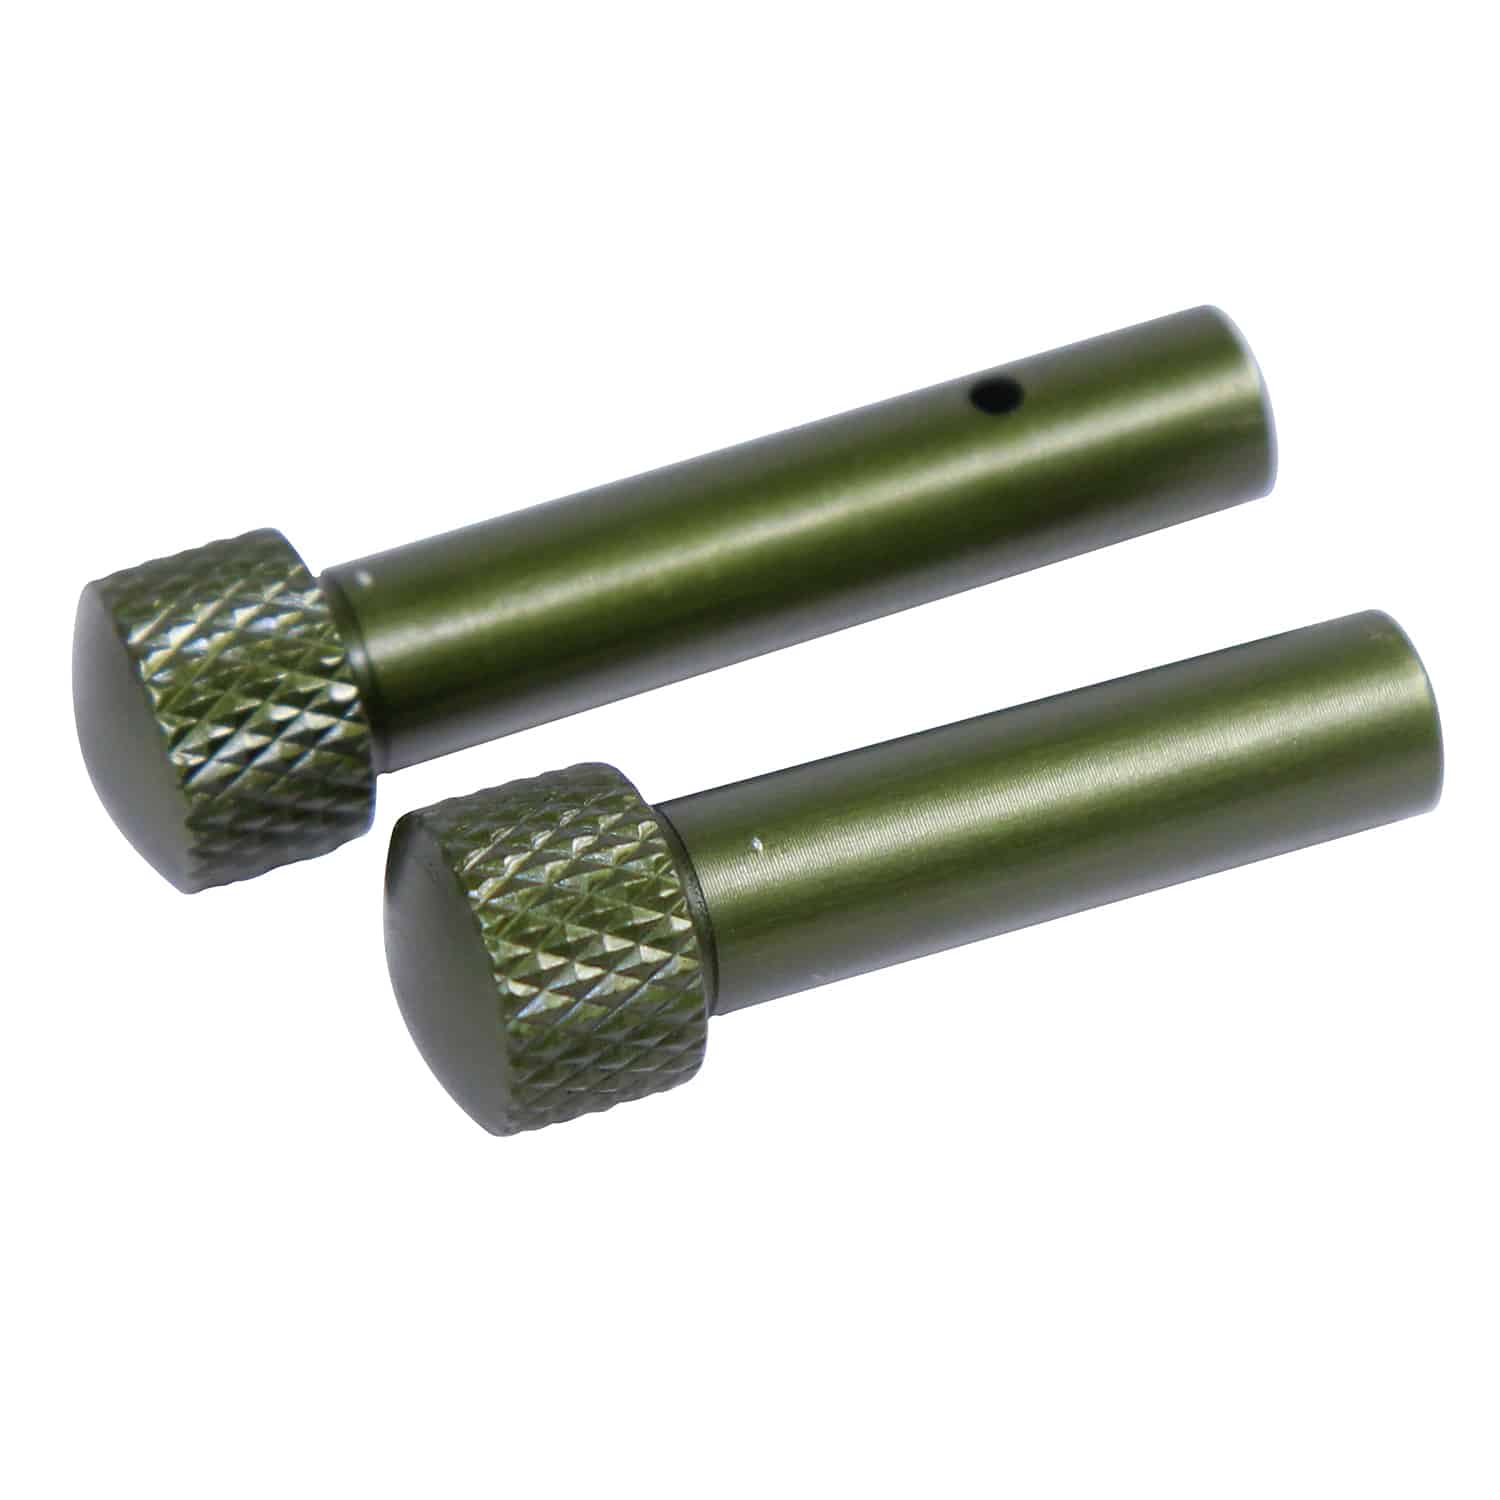 AR-15 5.56 Cal Extended Takedown Pin Set Gen 2 in Anodized Green